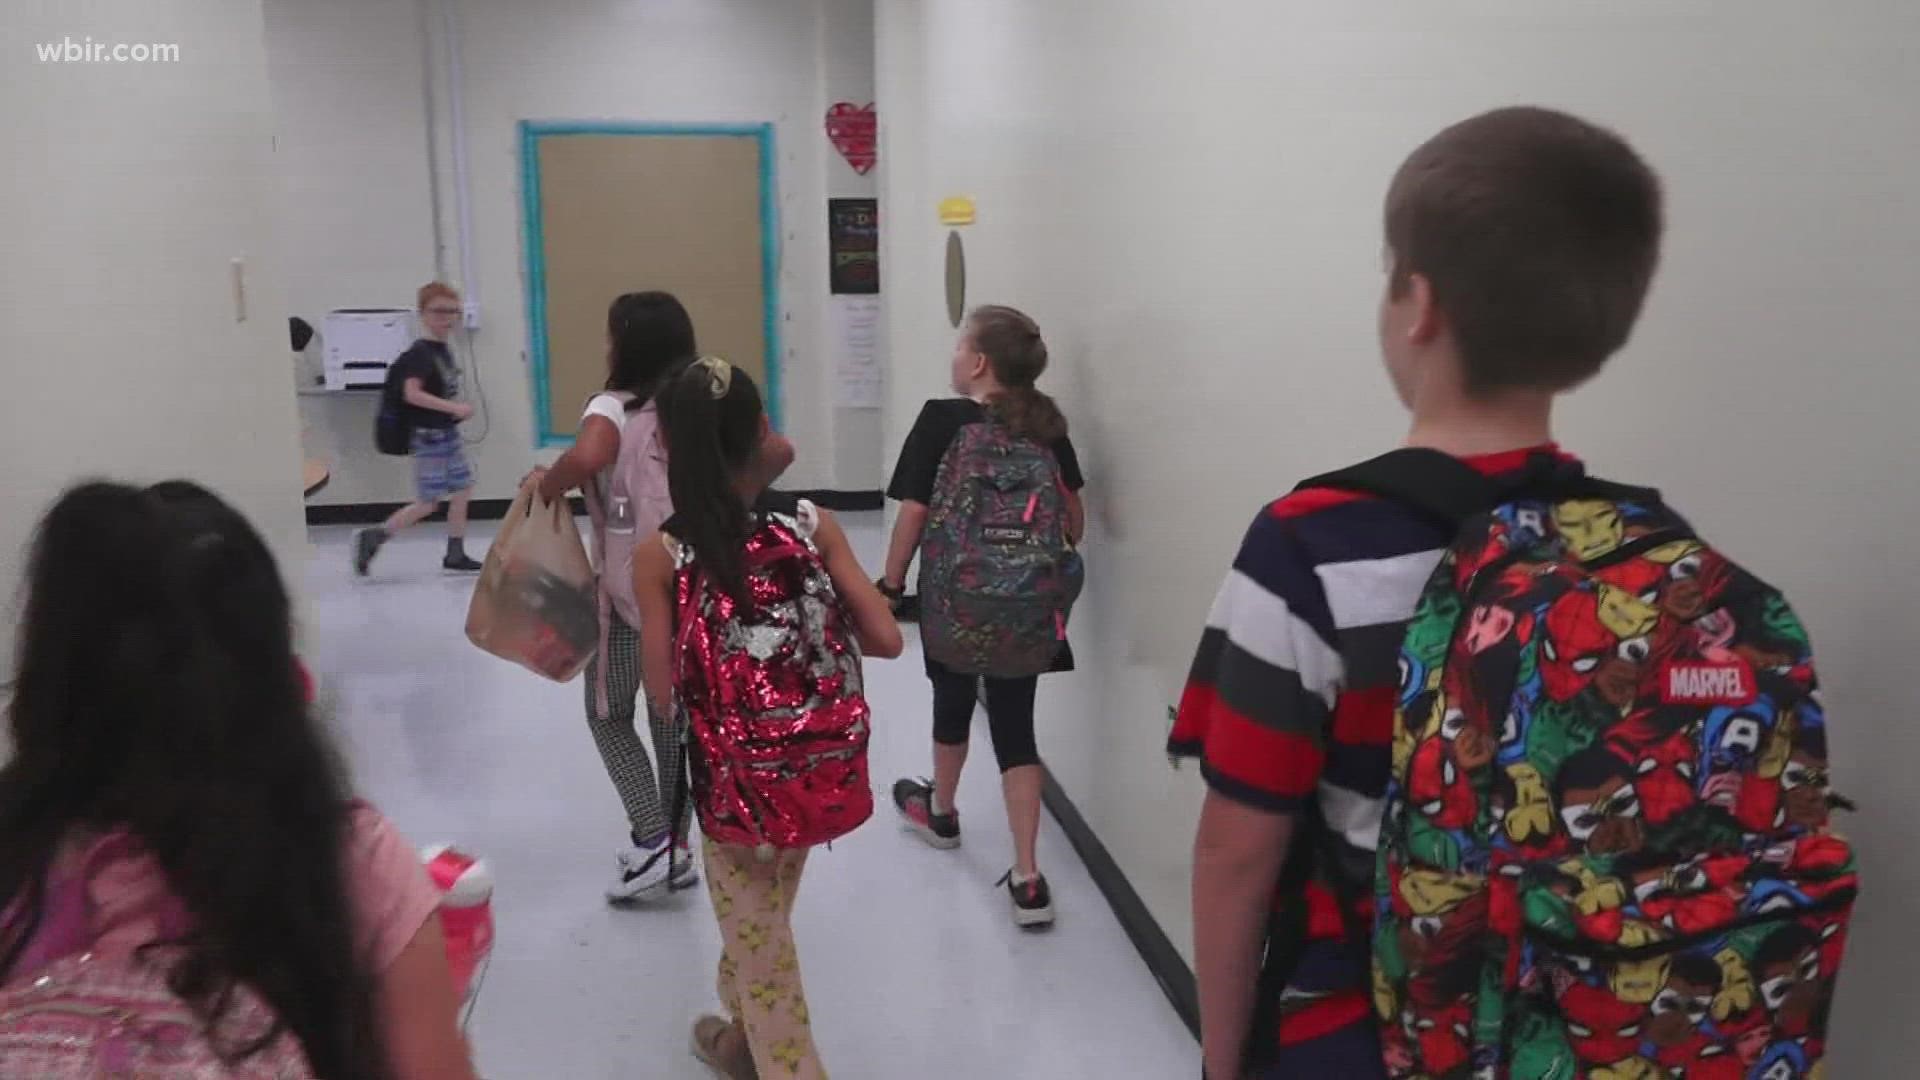 Now that COVID-19 cases are rising in East Tennessee, some parents say they are having second thoughts about in-person learning in Knox County.